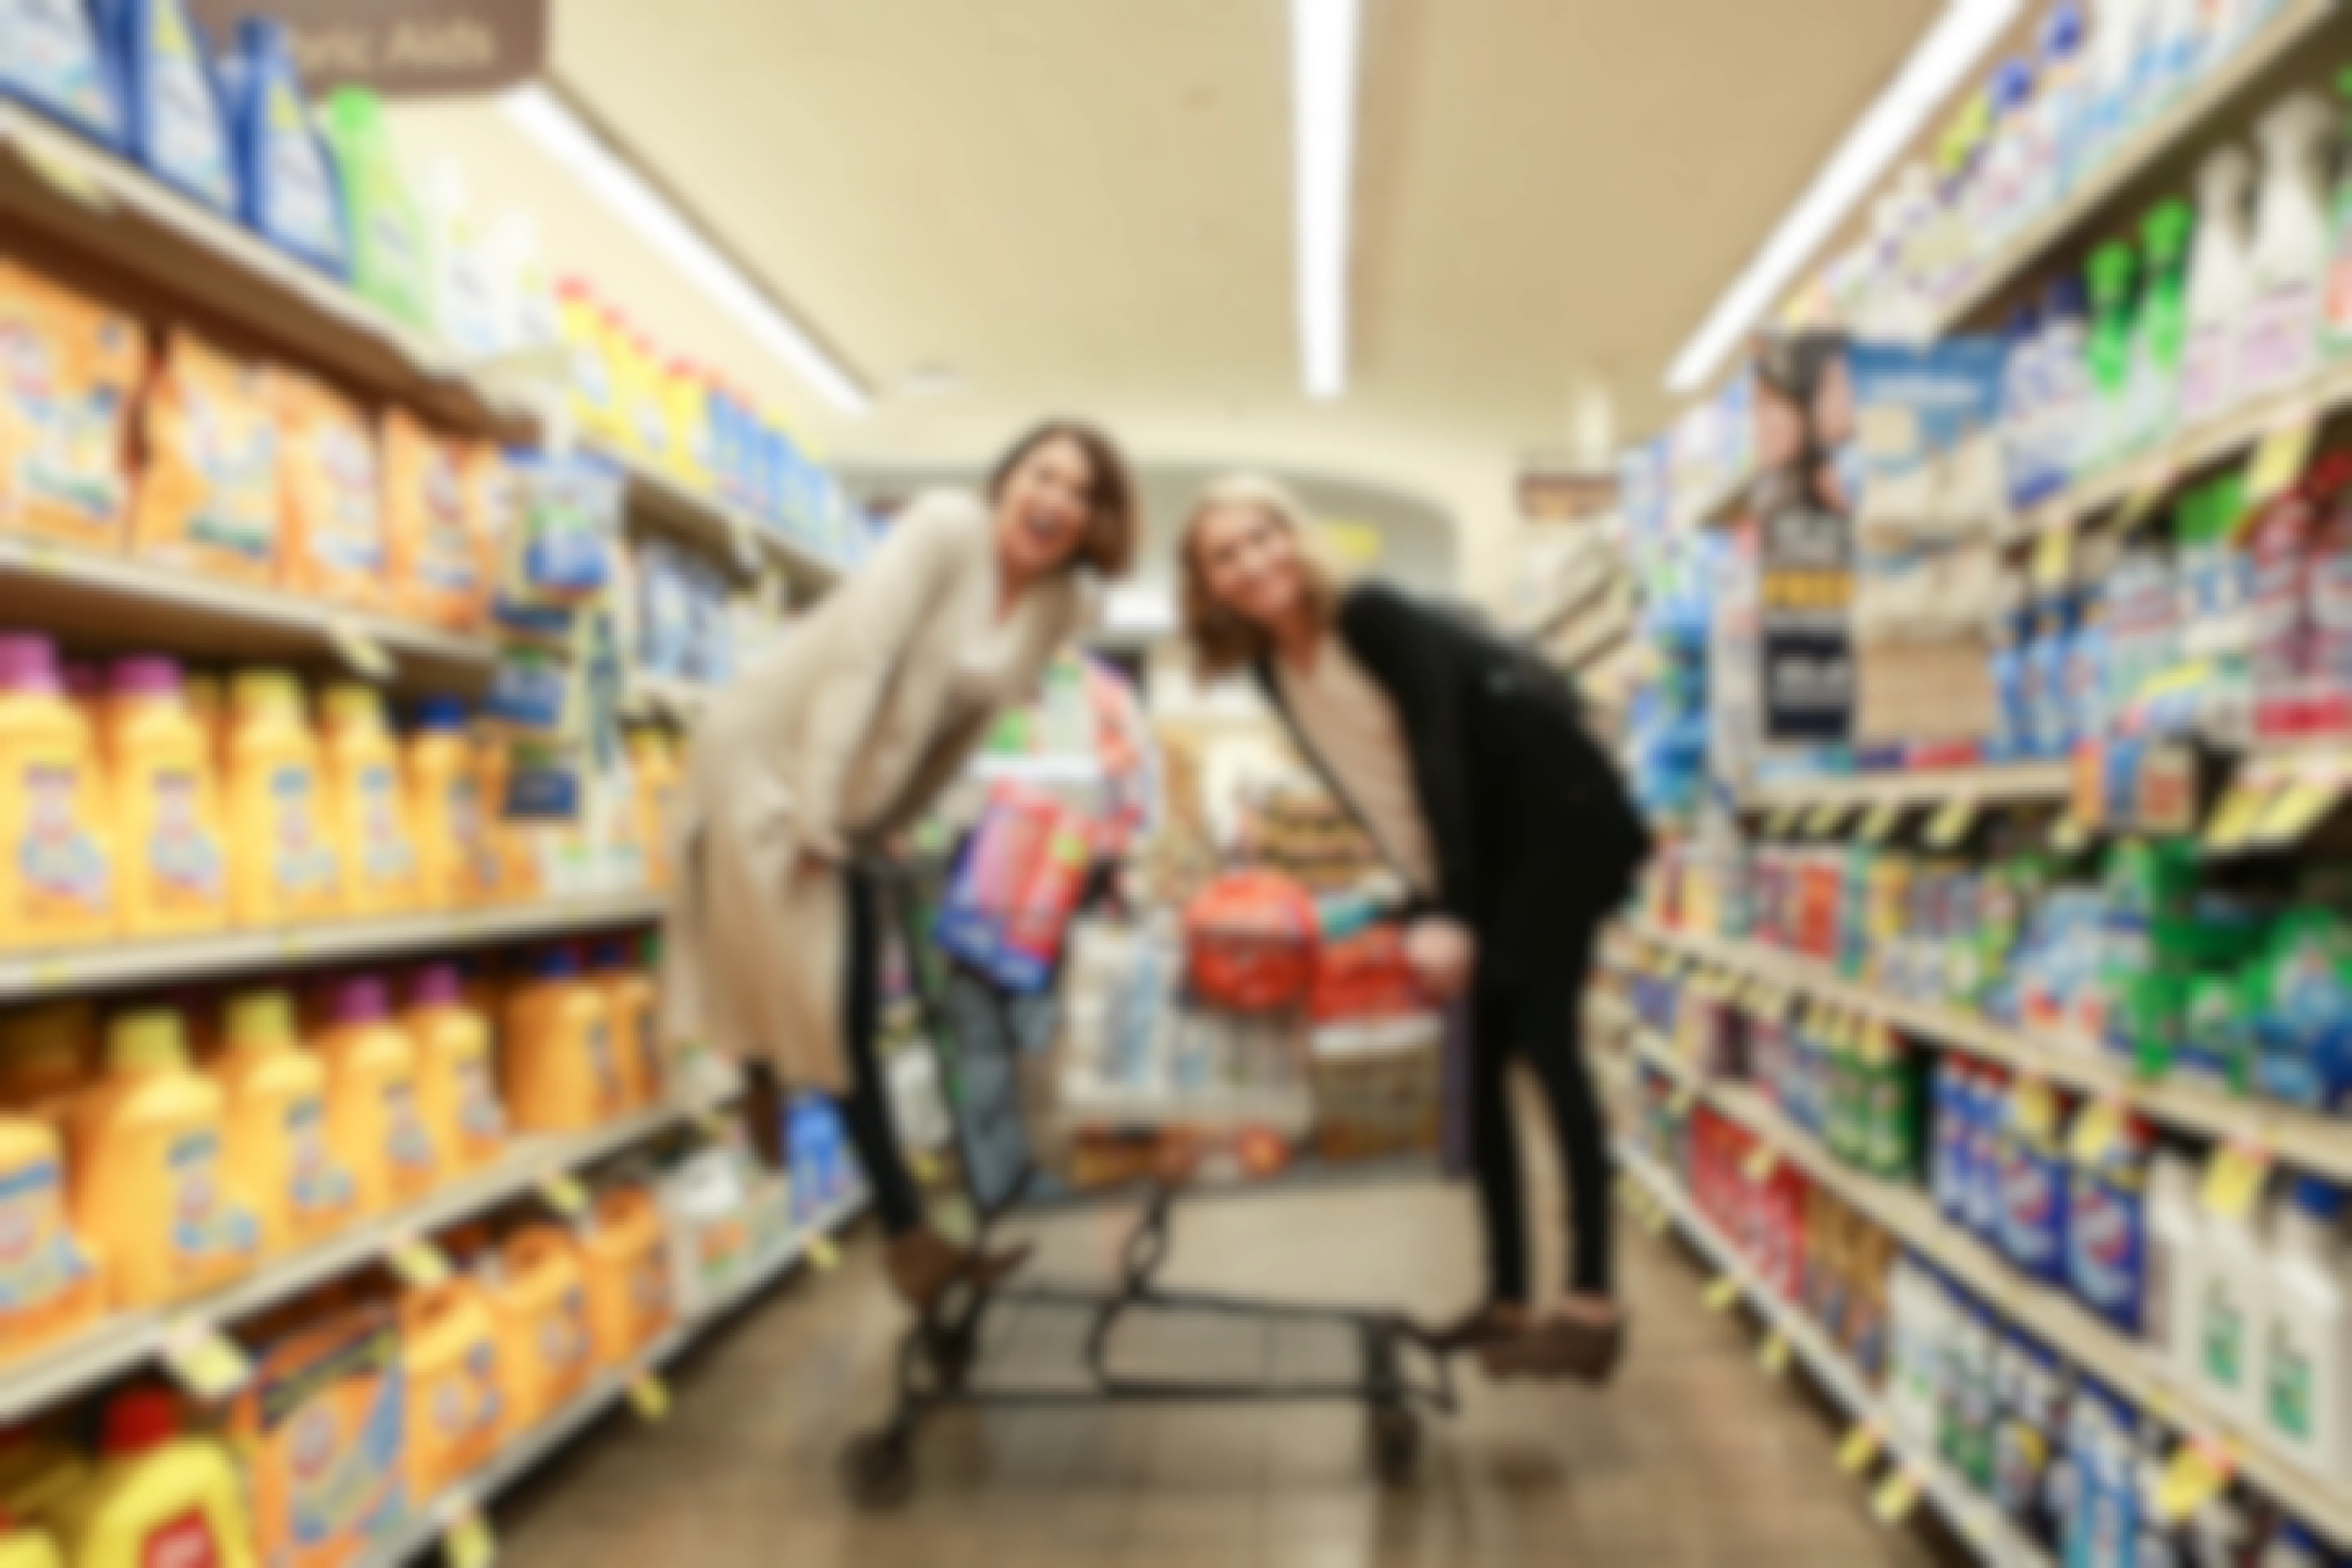 Two women balancing on a full shopping cart of groceries in the middle of a Kroger store aisle